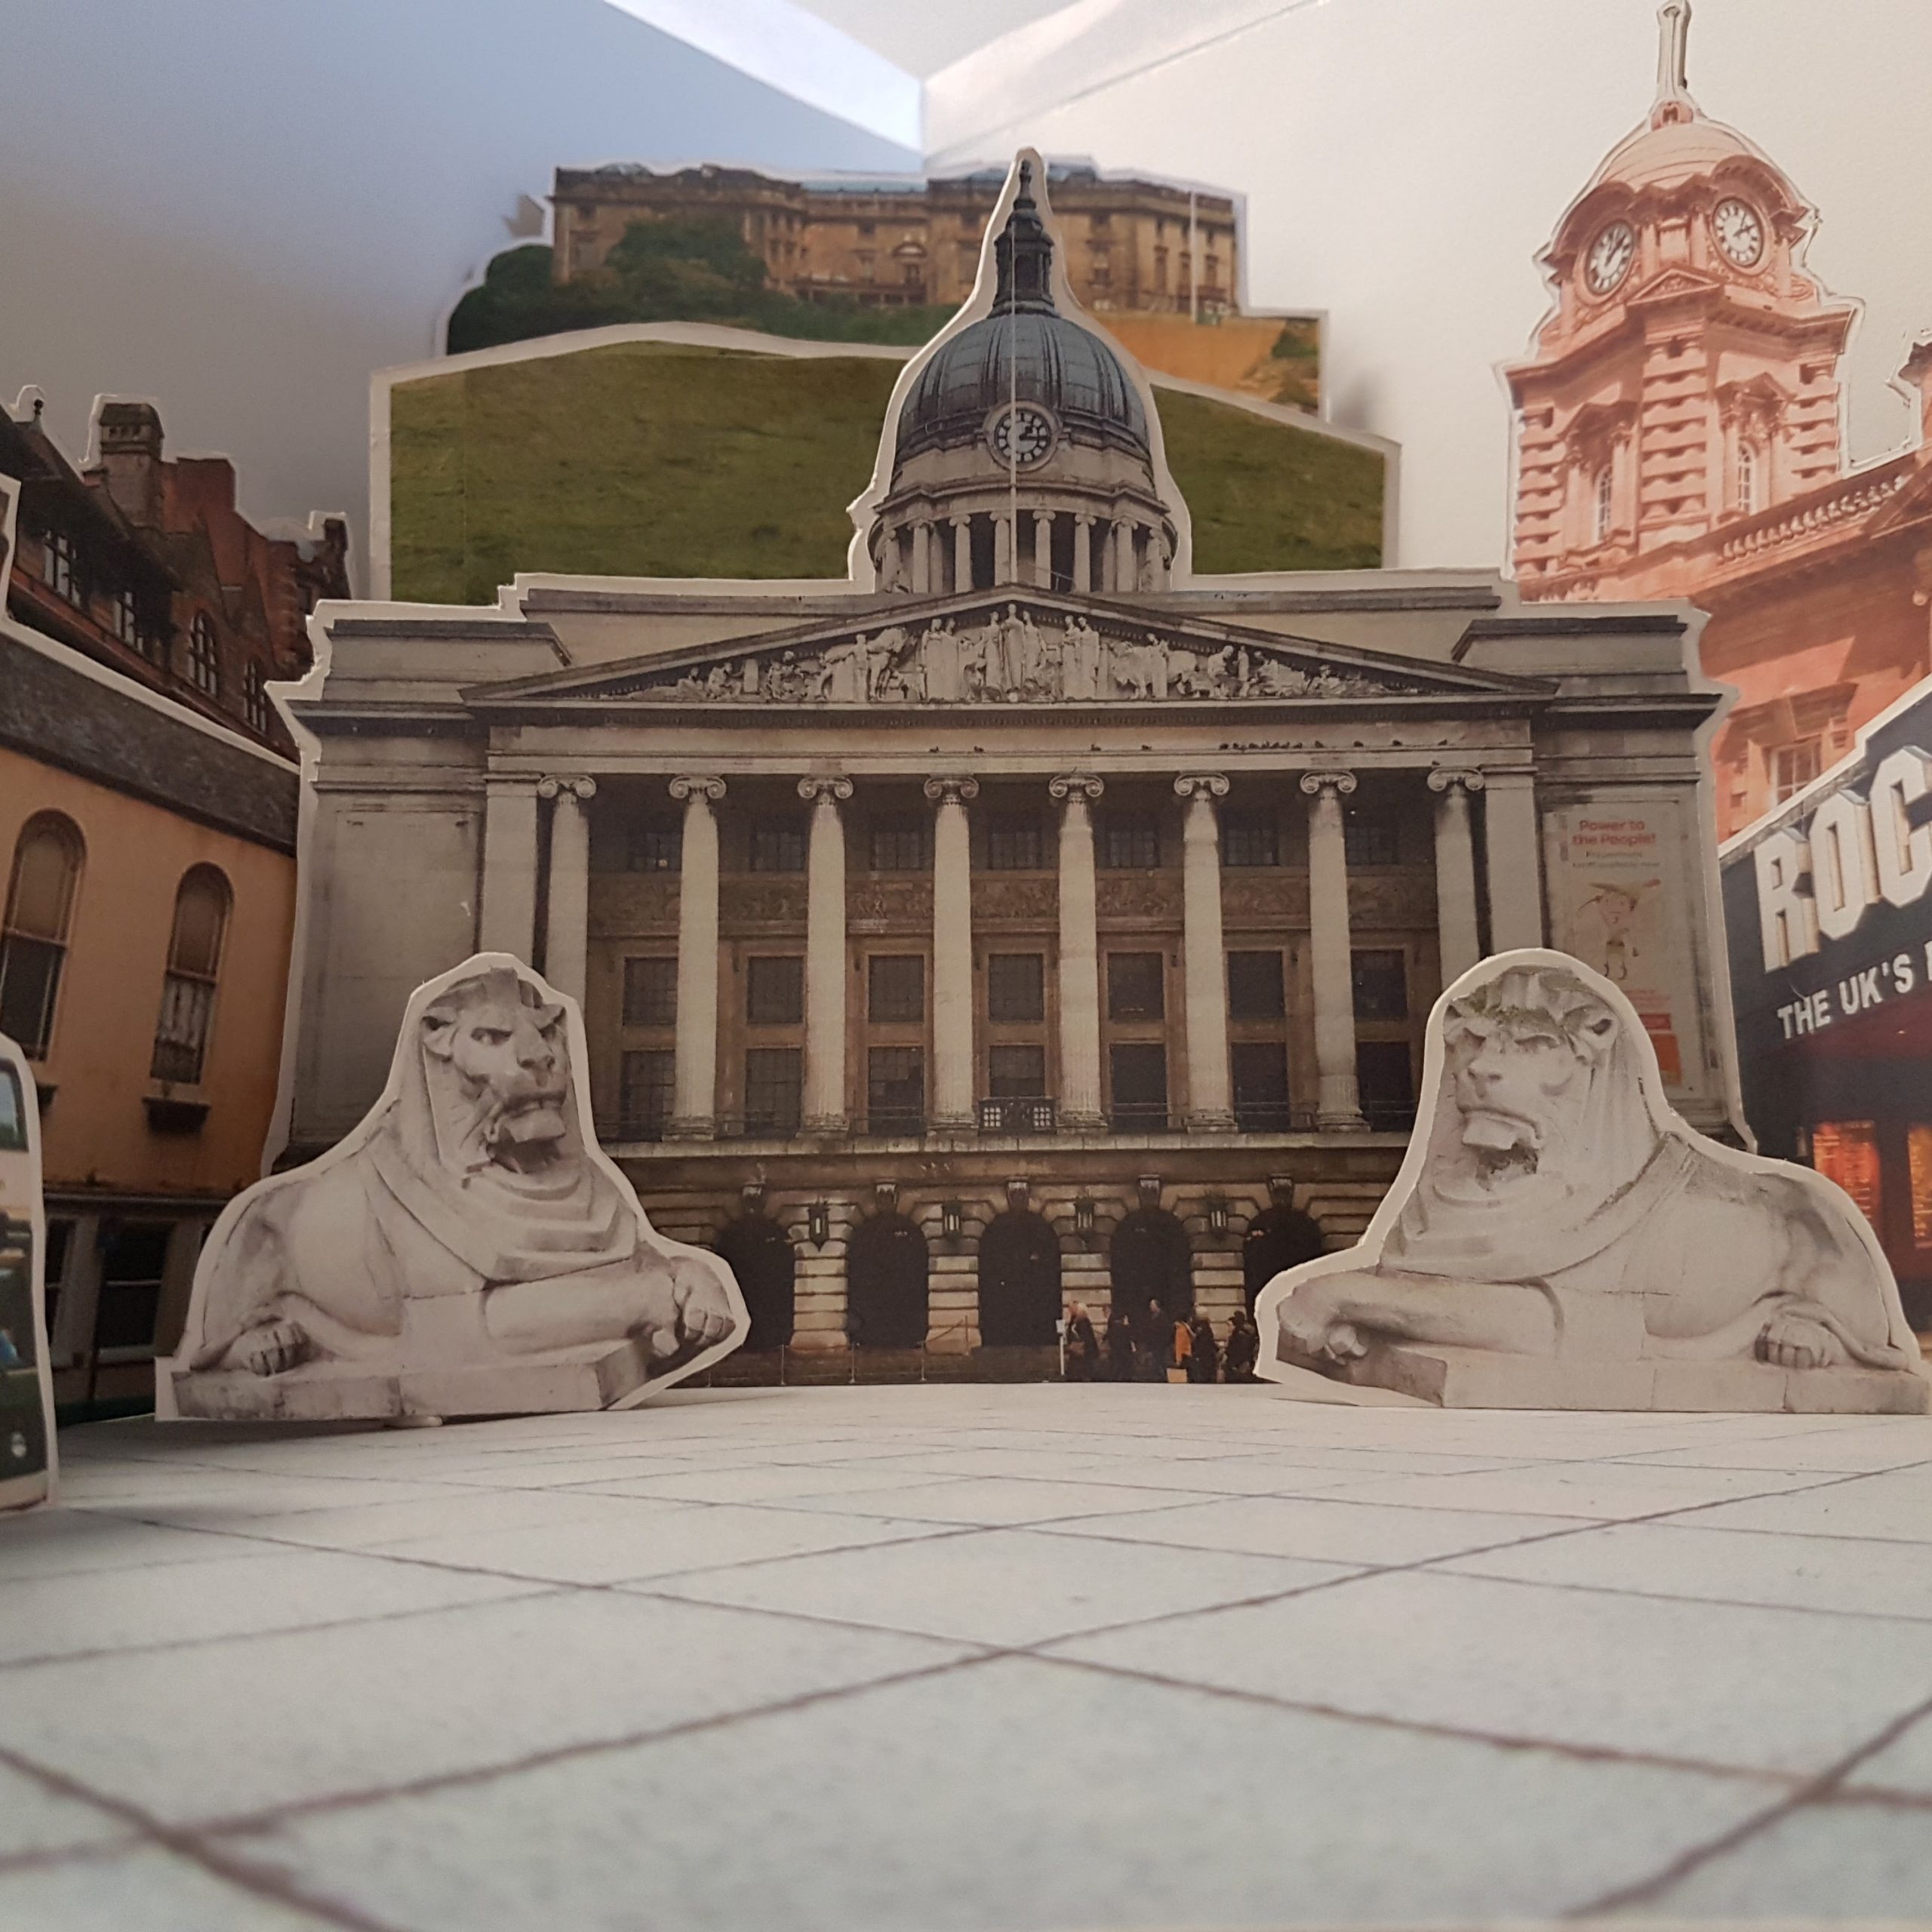 a photograph of my nostalgic scene of Nottingham city centre showing the council house, the lions, Rock City and The Angel pub